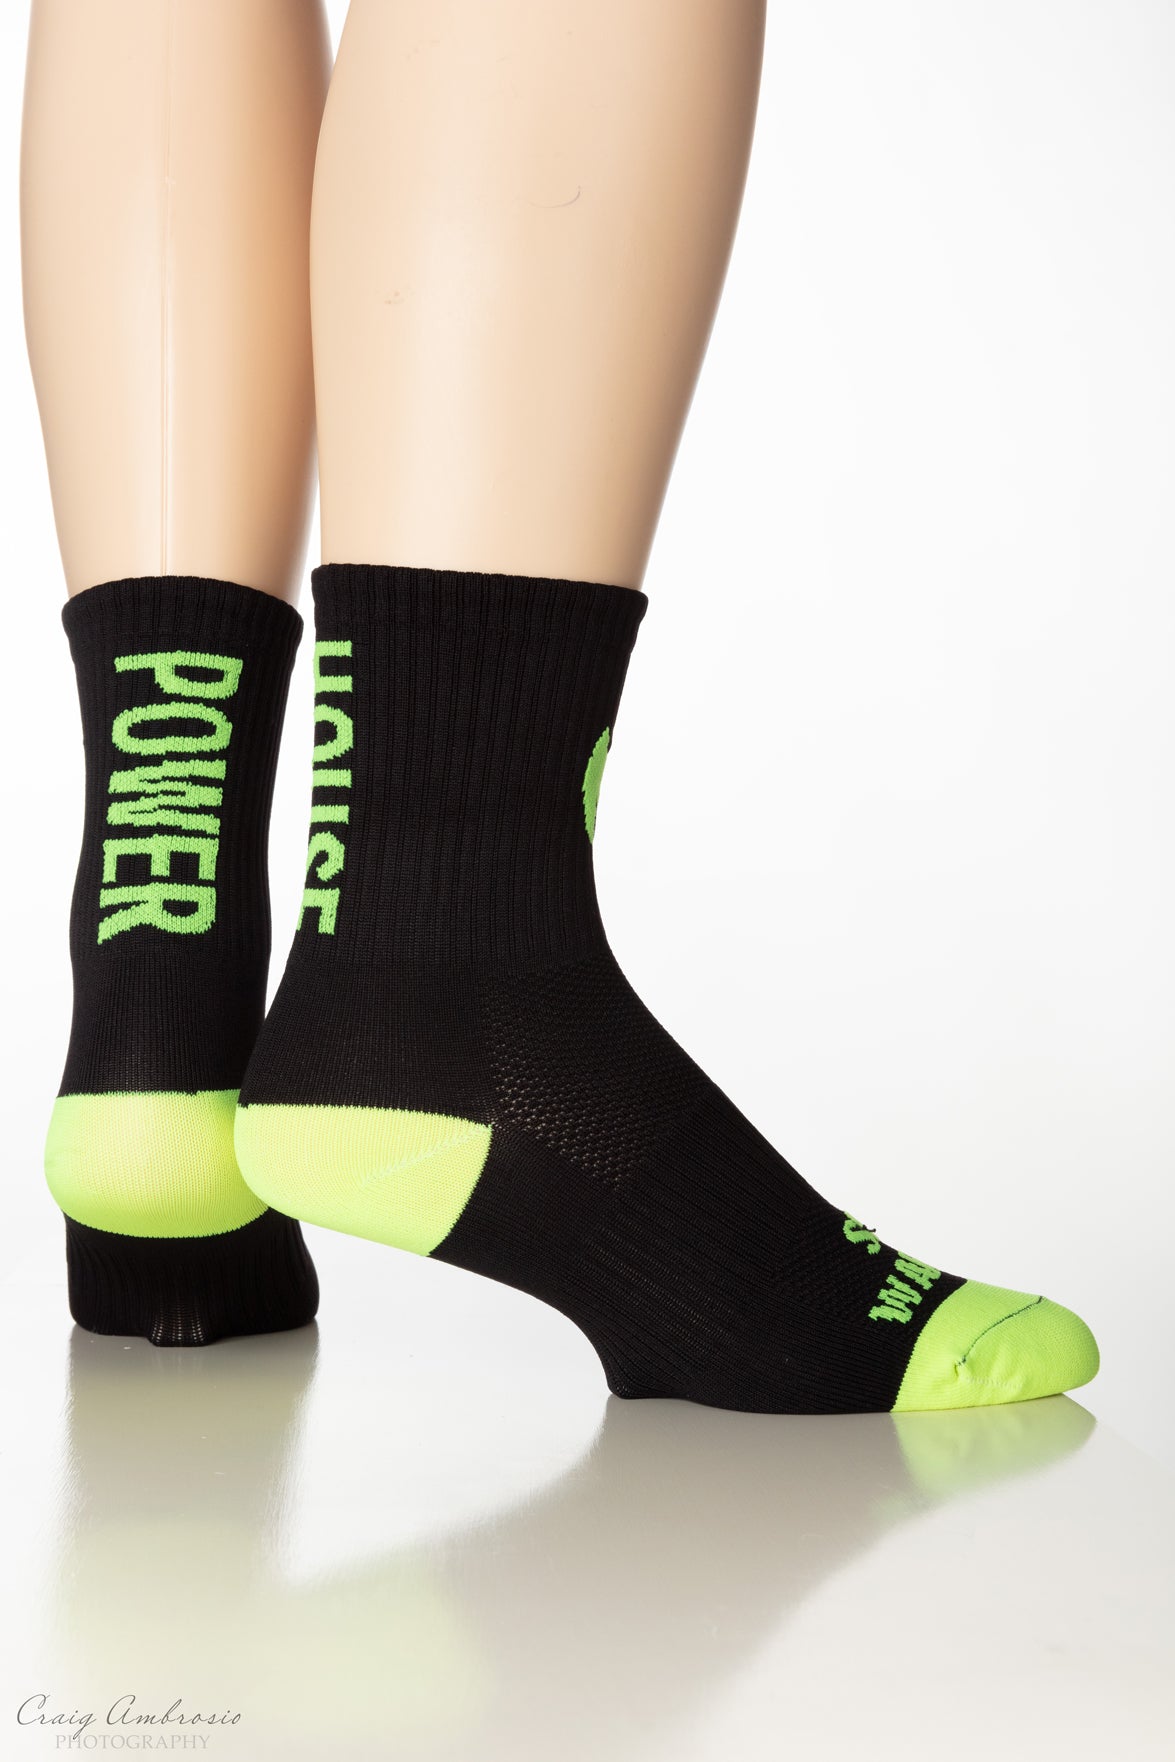 WARRIOR POWER HOUSE Men’s and Women’s Compression Cycling Socks